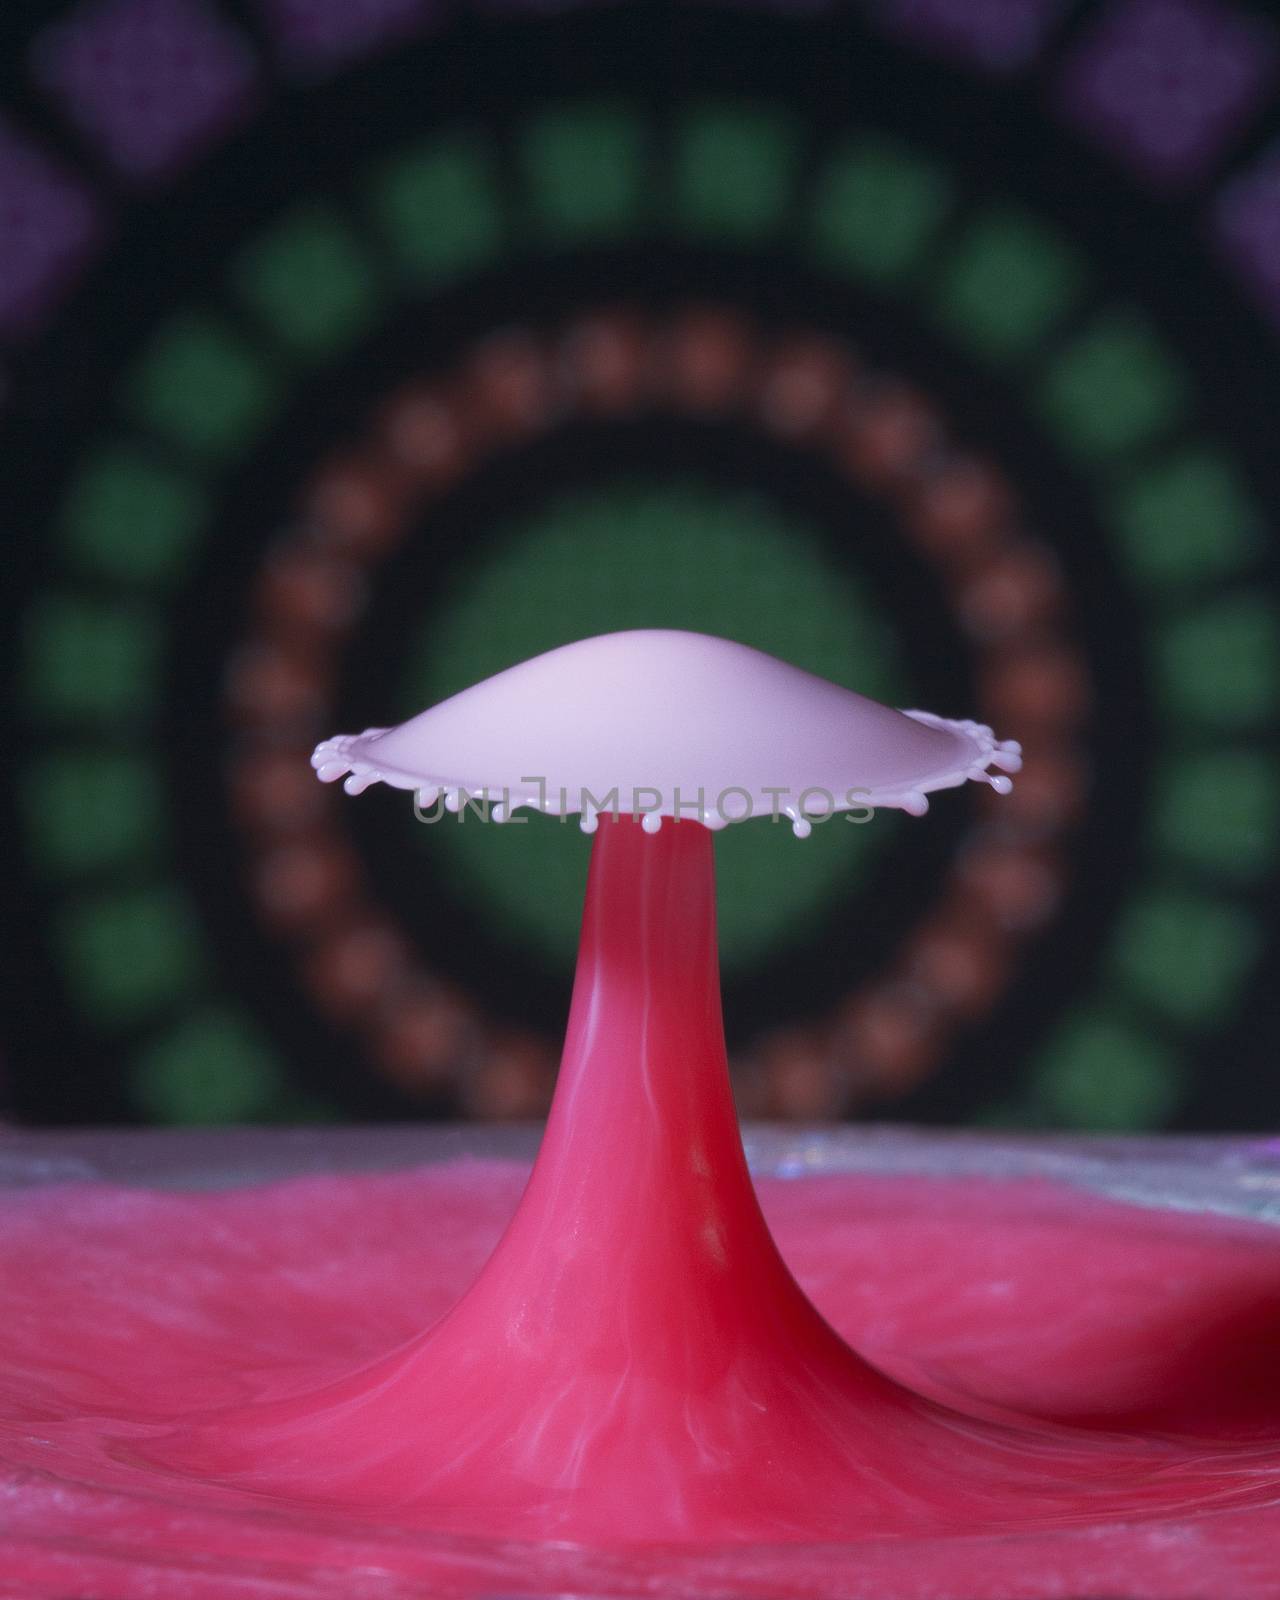 Milk dropped into a tank of red milk gives a pink umbrella shape in the center of a bulls eye backdrop. Liquid drop art, water drop photography